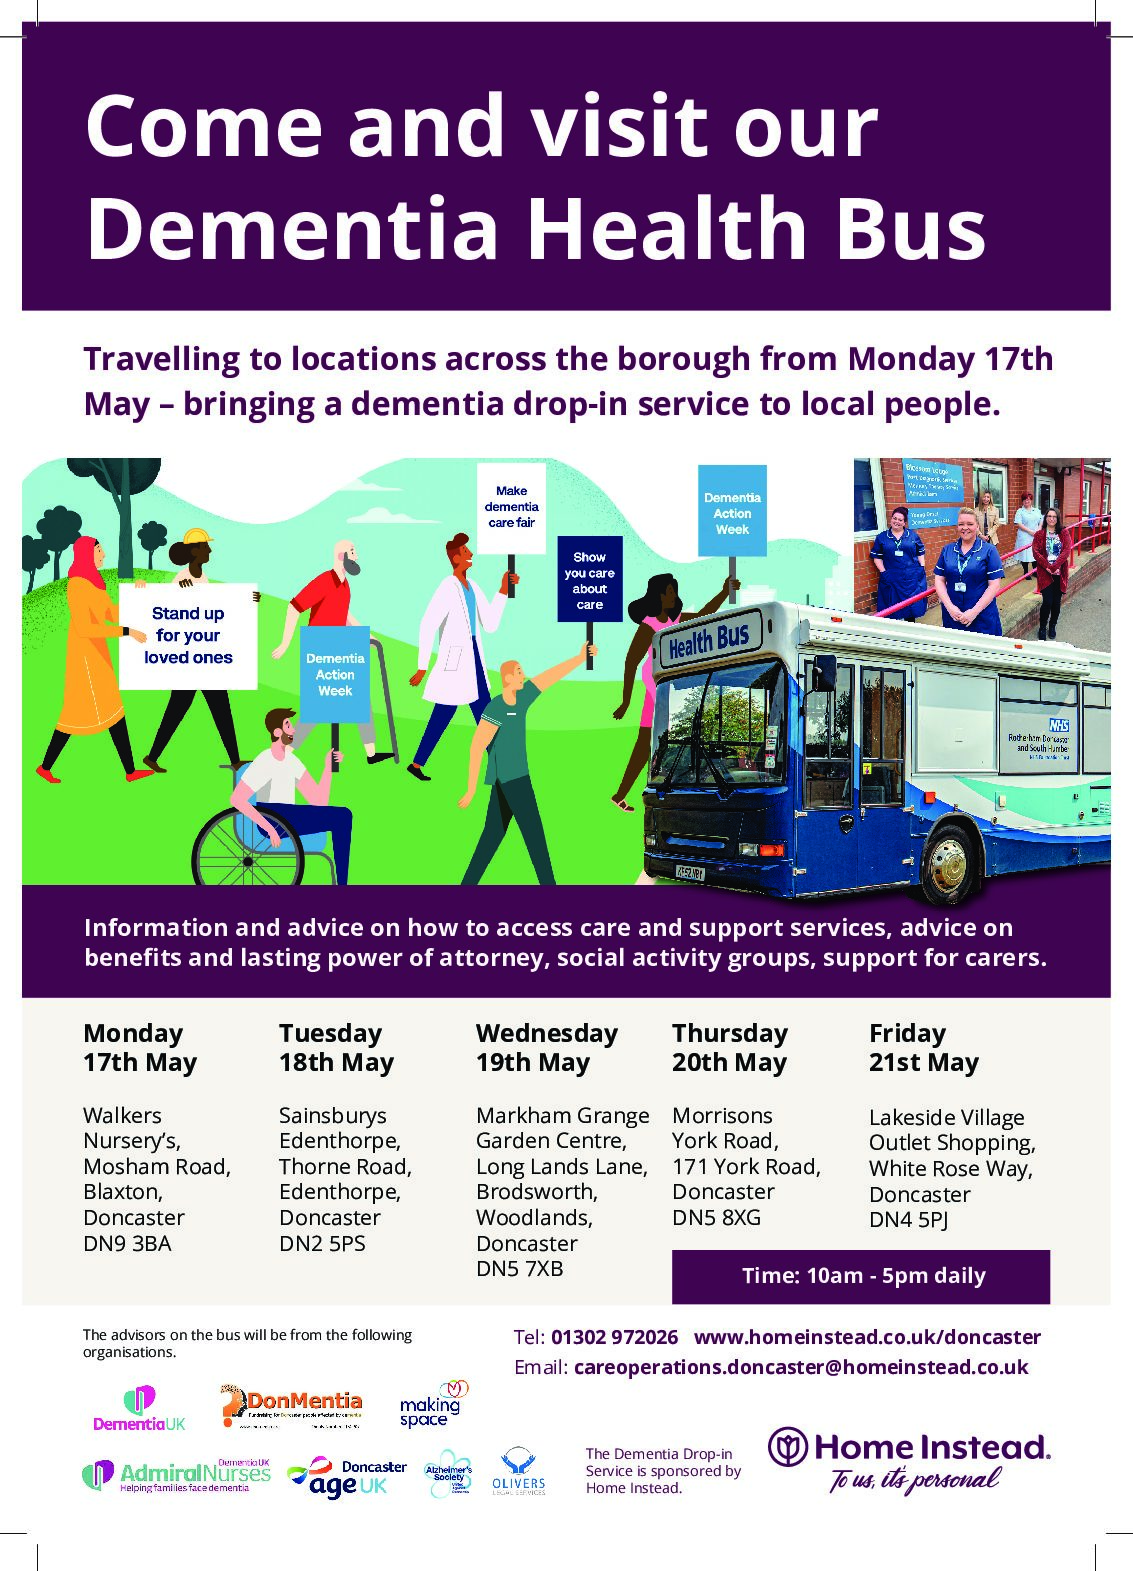 Come and visit the Dementia Health Bus (Doncaster)